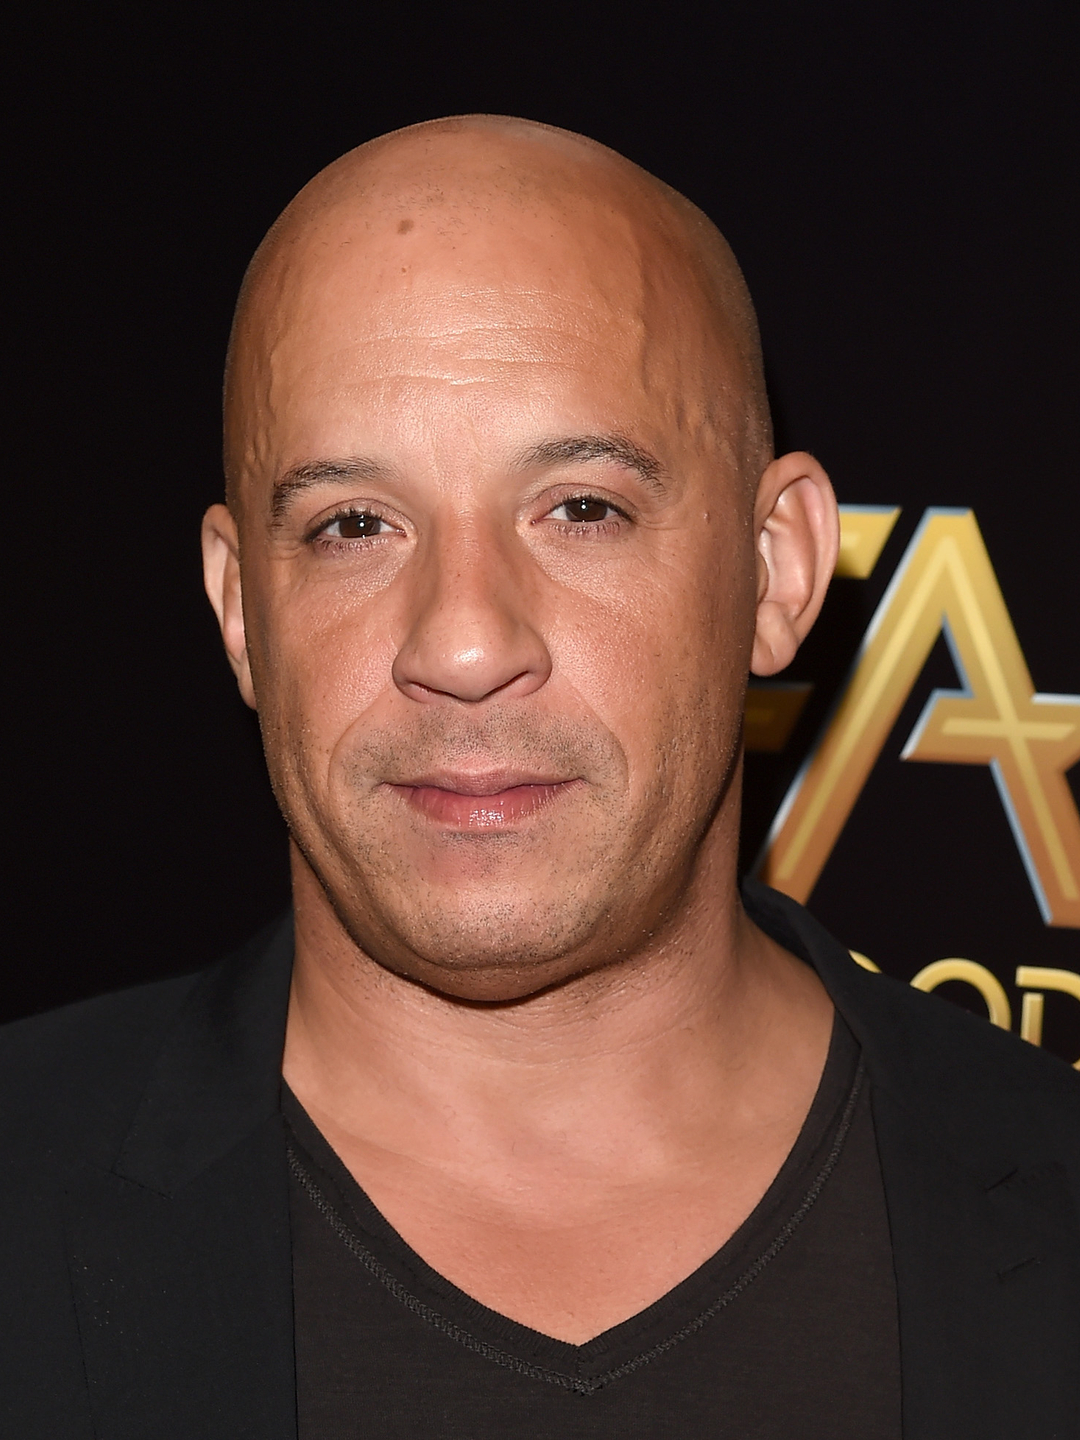 Vin Diesel who is his father